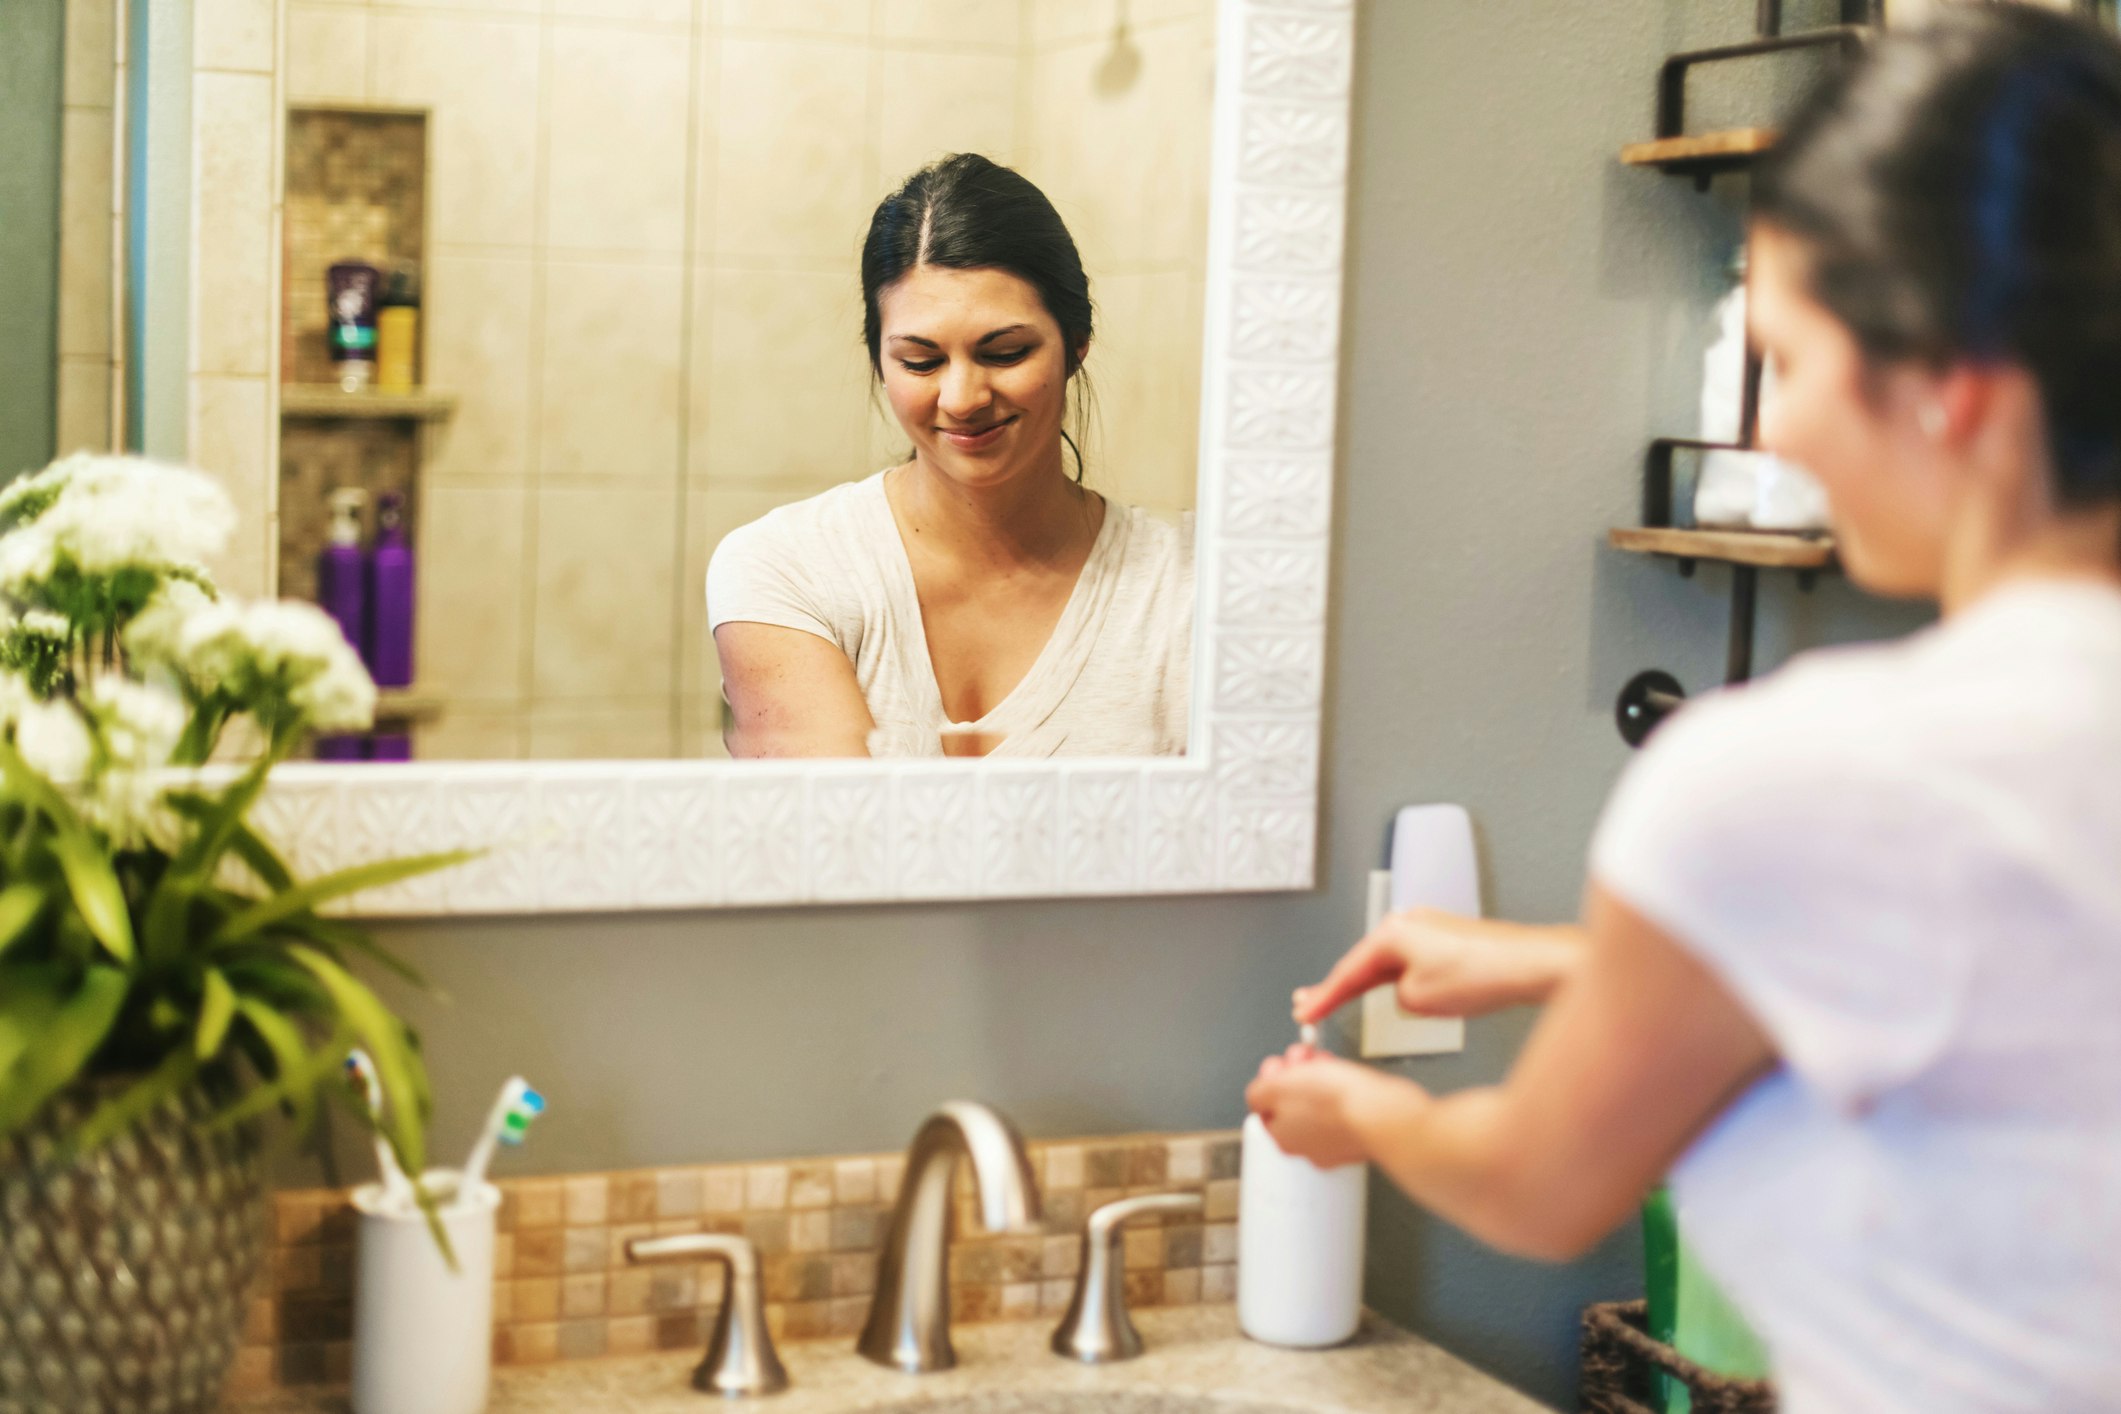 A smiling woman reaches for a product on her counter in her bathroom